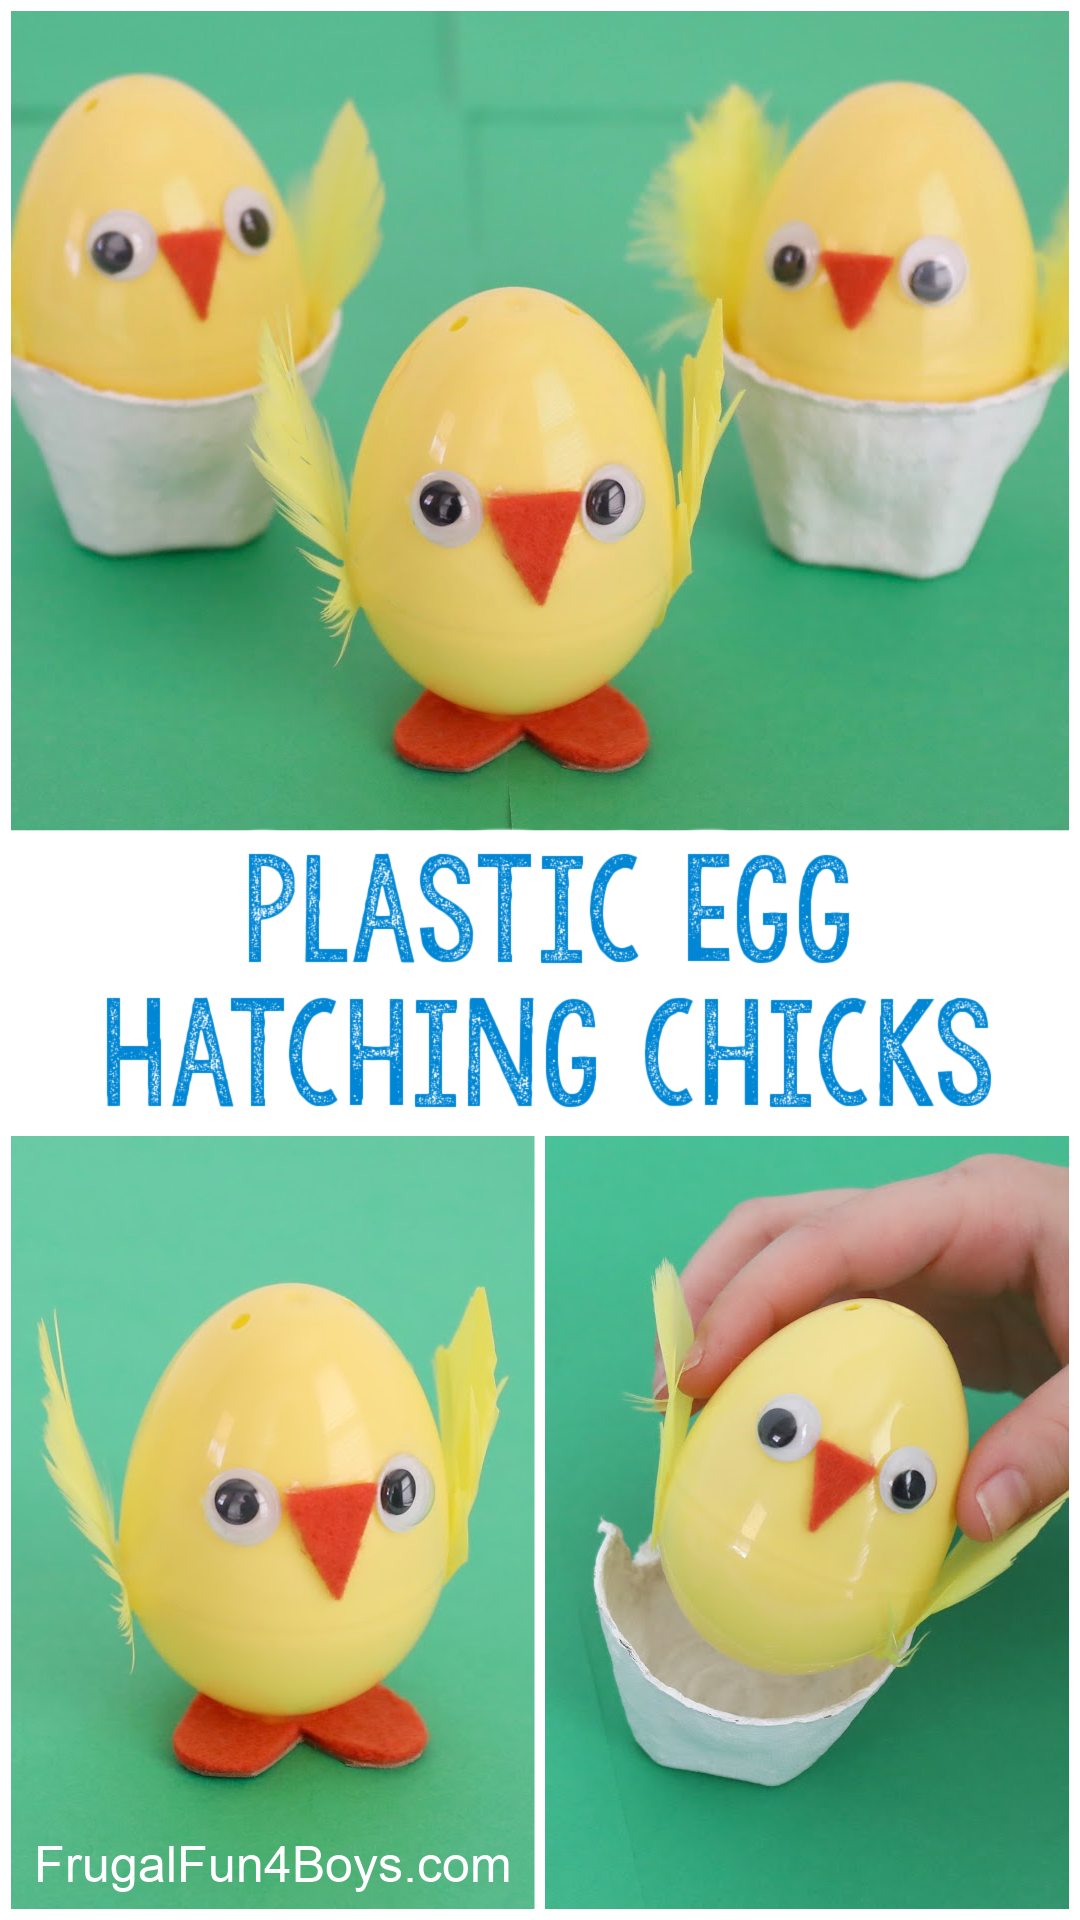 Hatching chick craft for kids